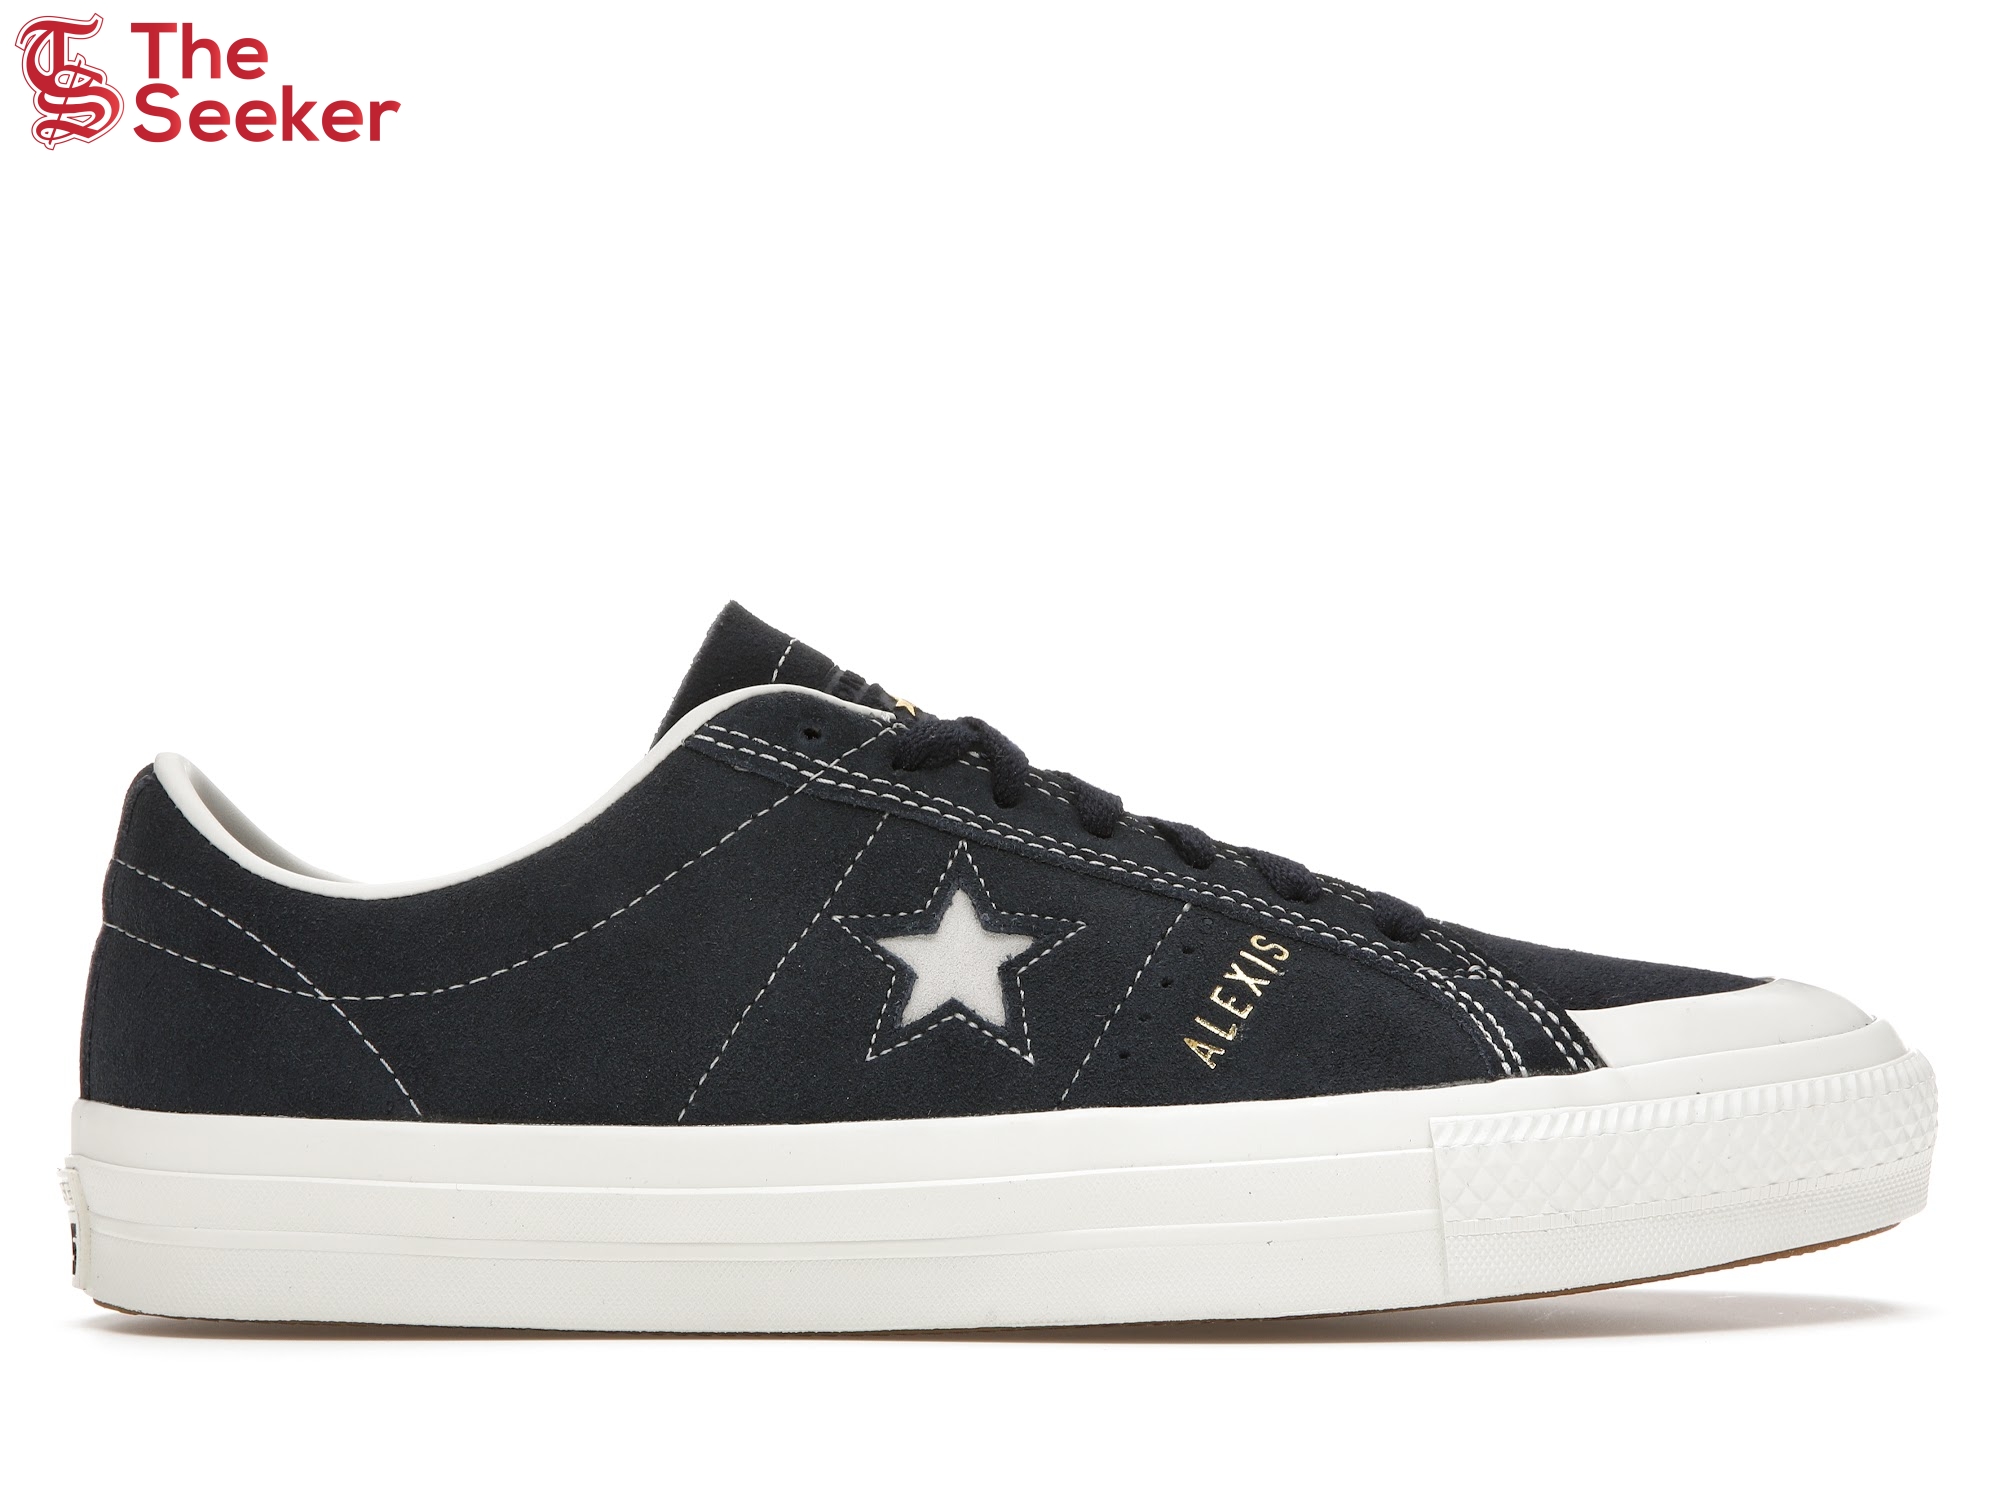 Converse CONS One Star Pro AS Obsidian